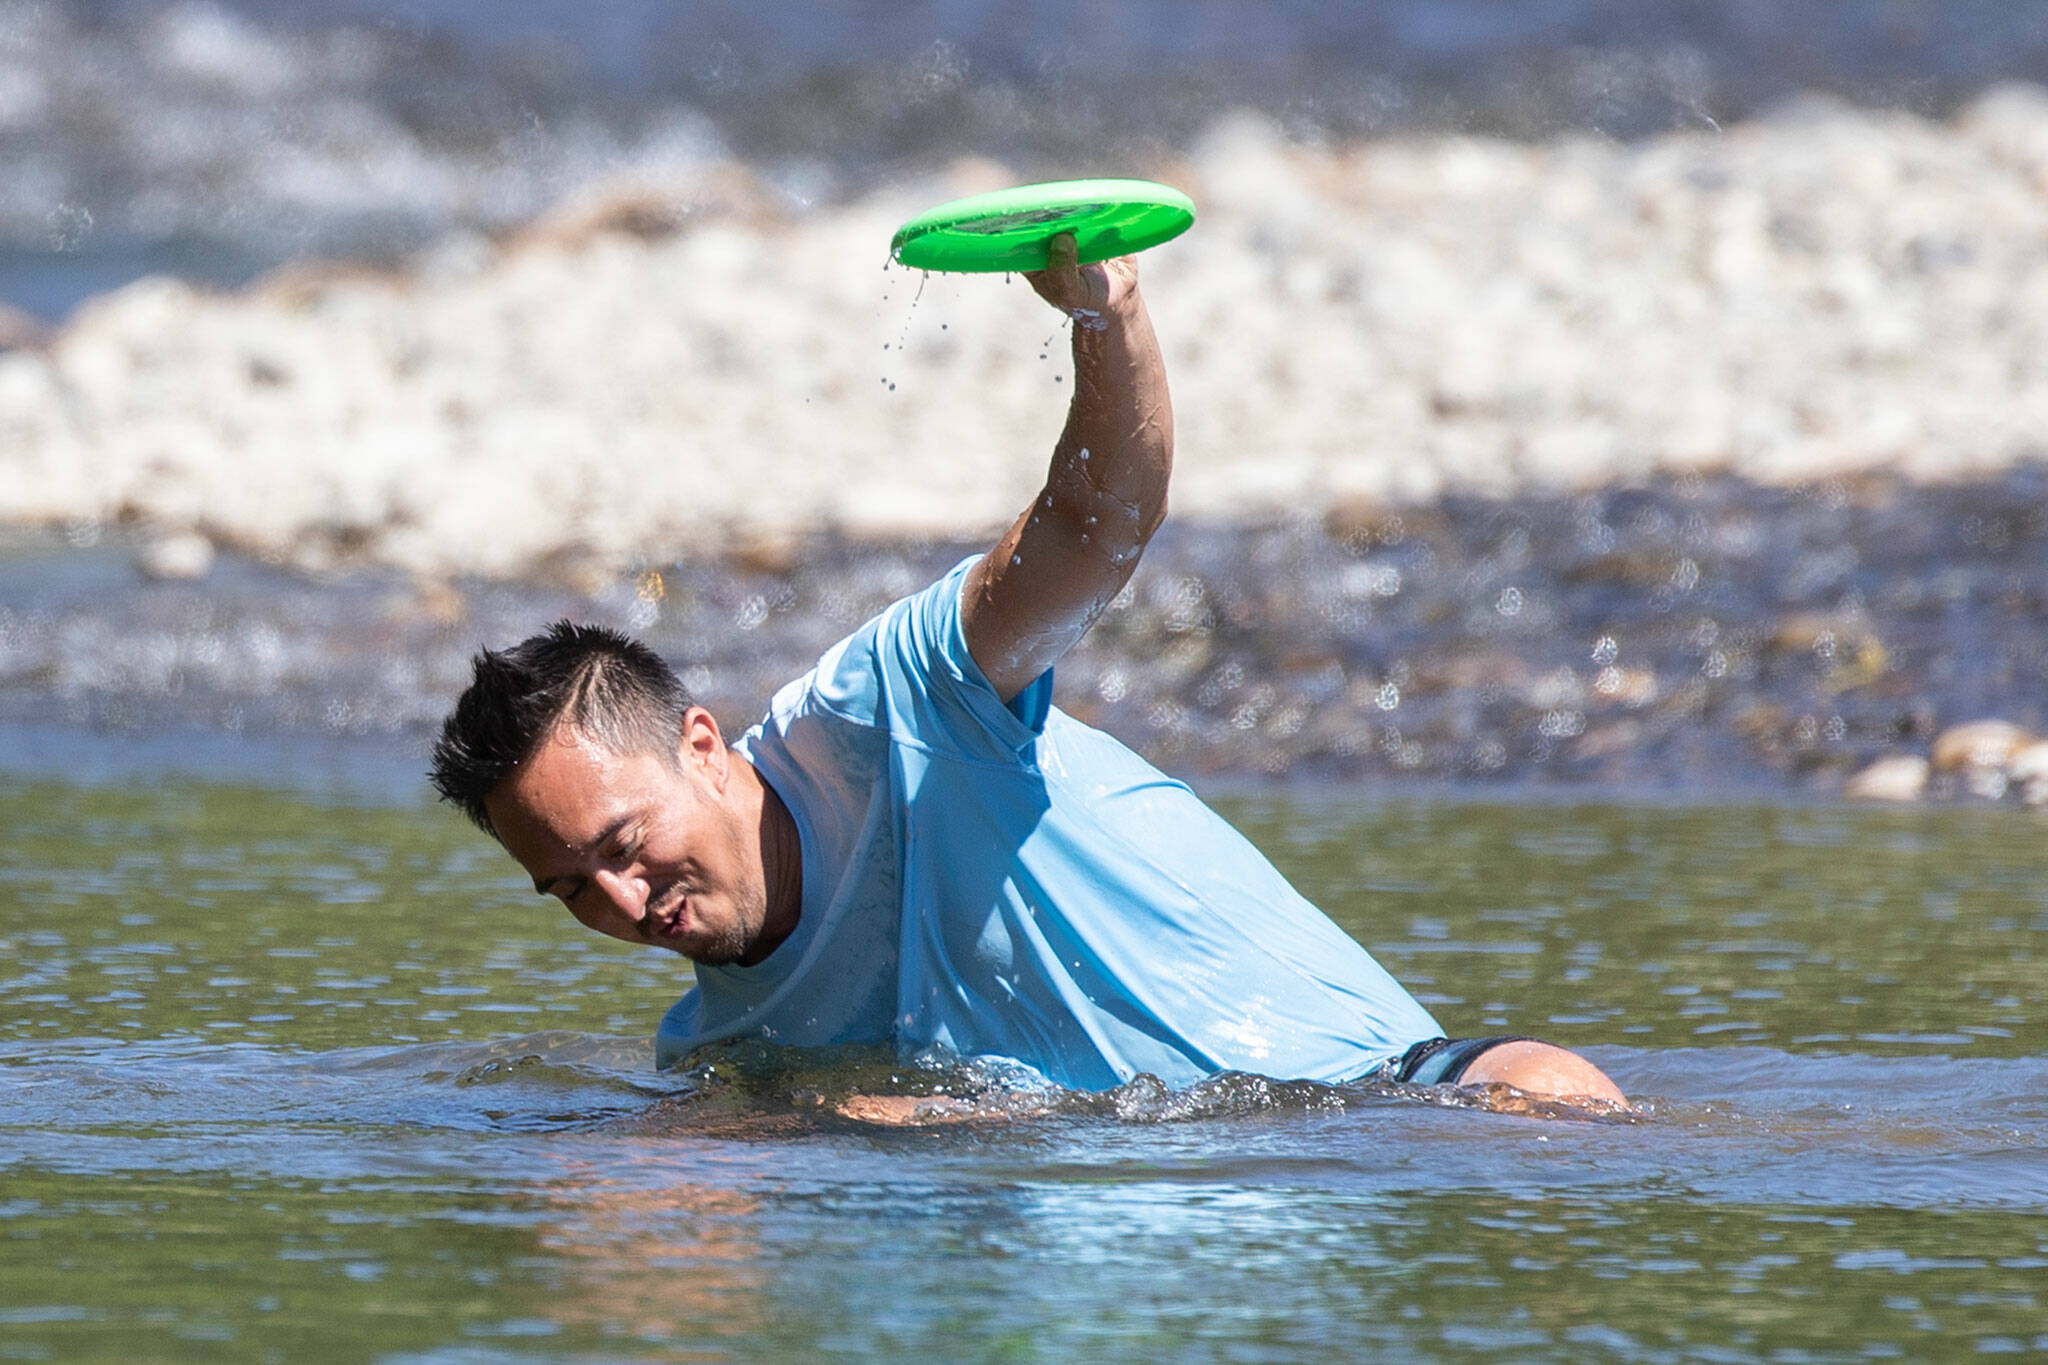 Justin Ofrancia gathers himself catching a frisbee Wednesday afternoon in the waters of the Pilchuck River in Snohomish. (Kevin Clark / The Herald)